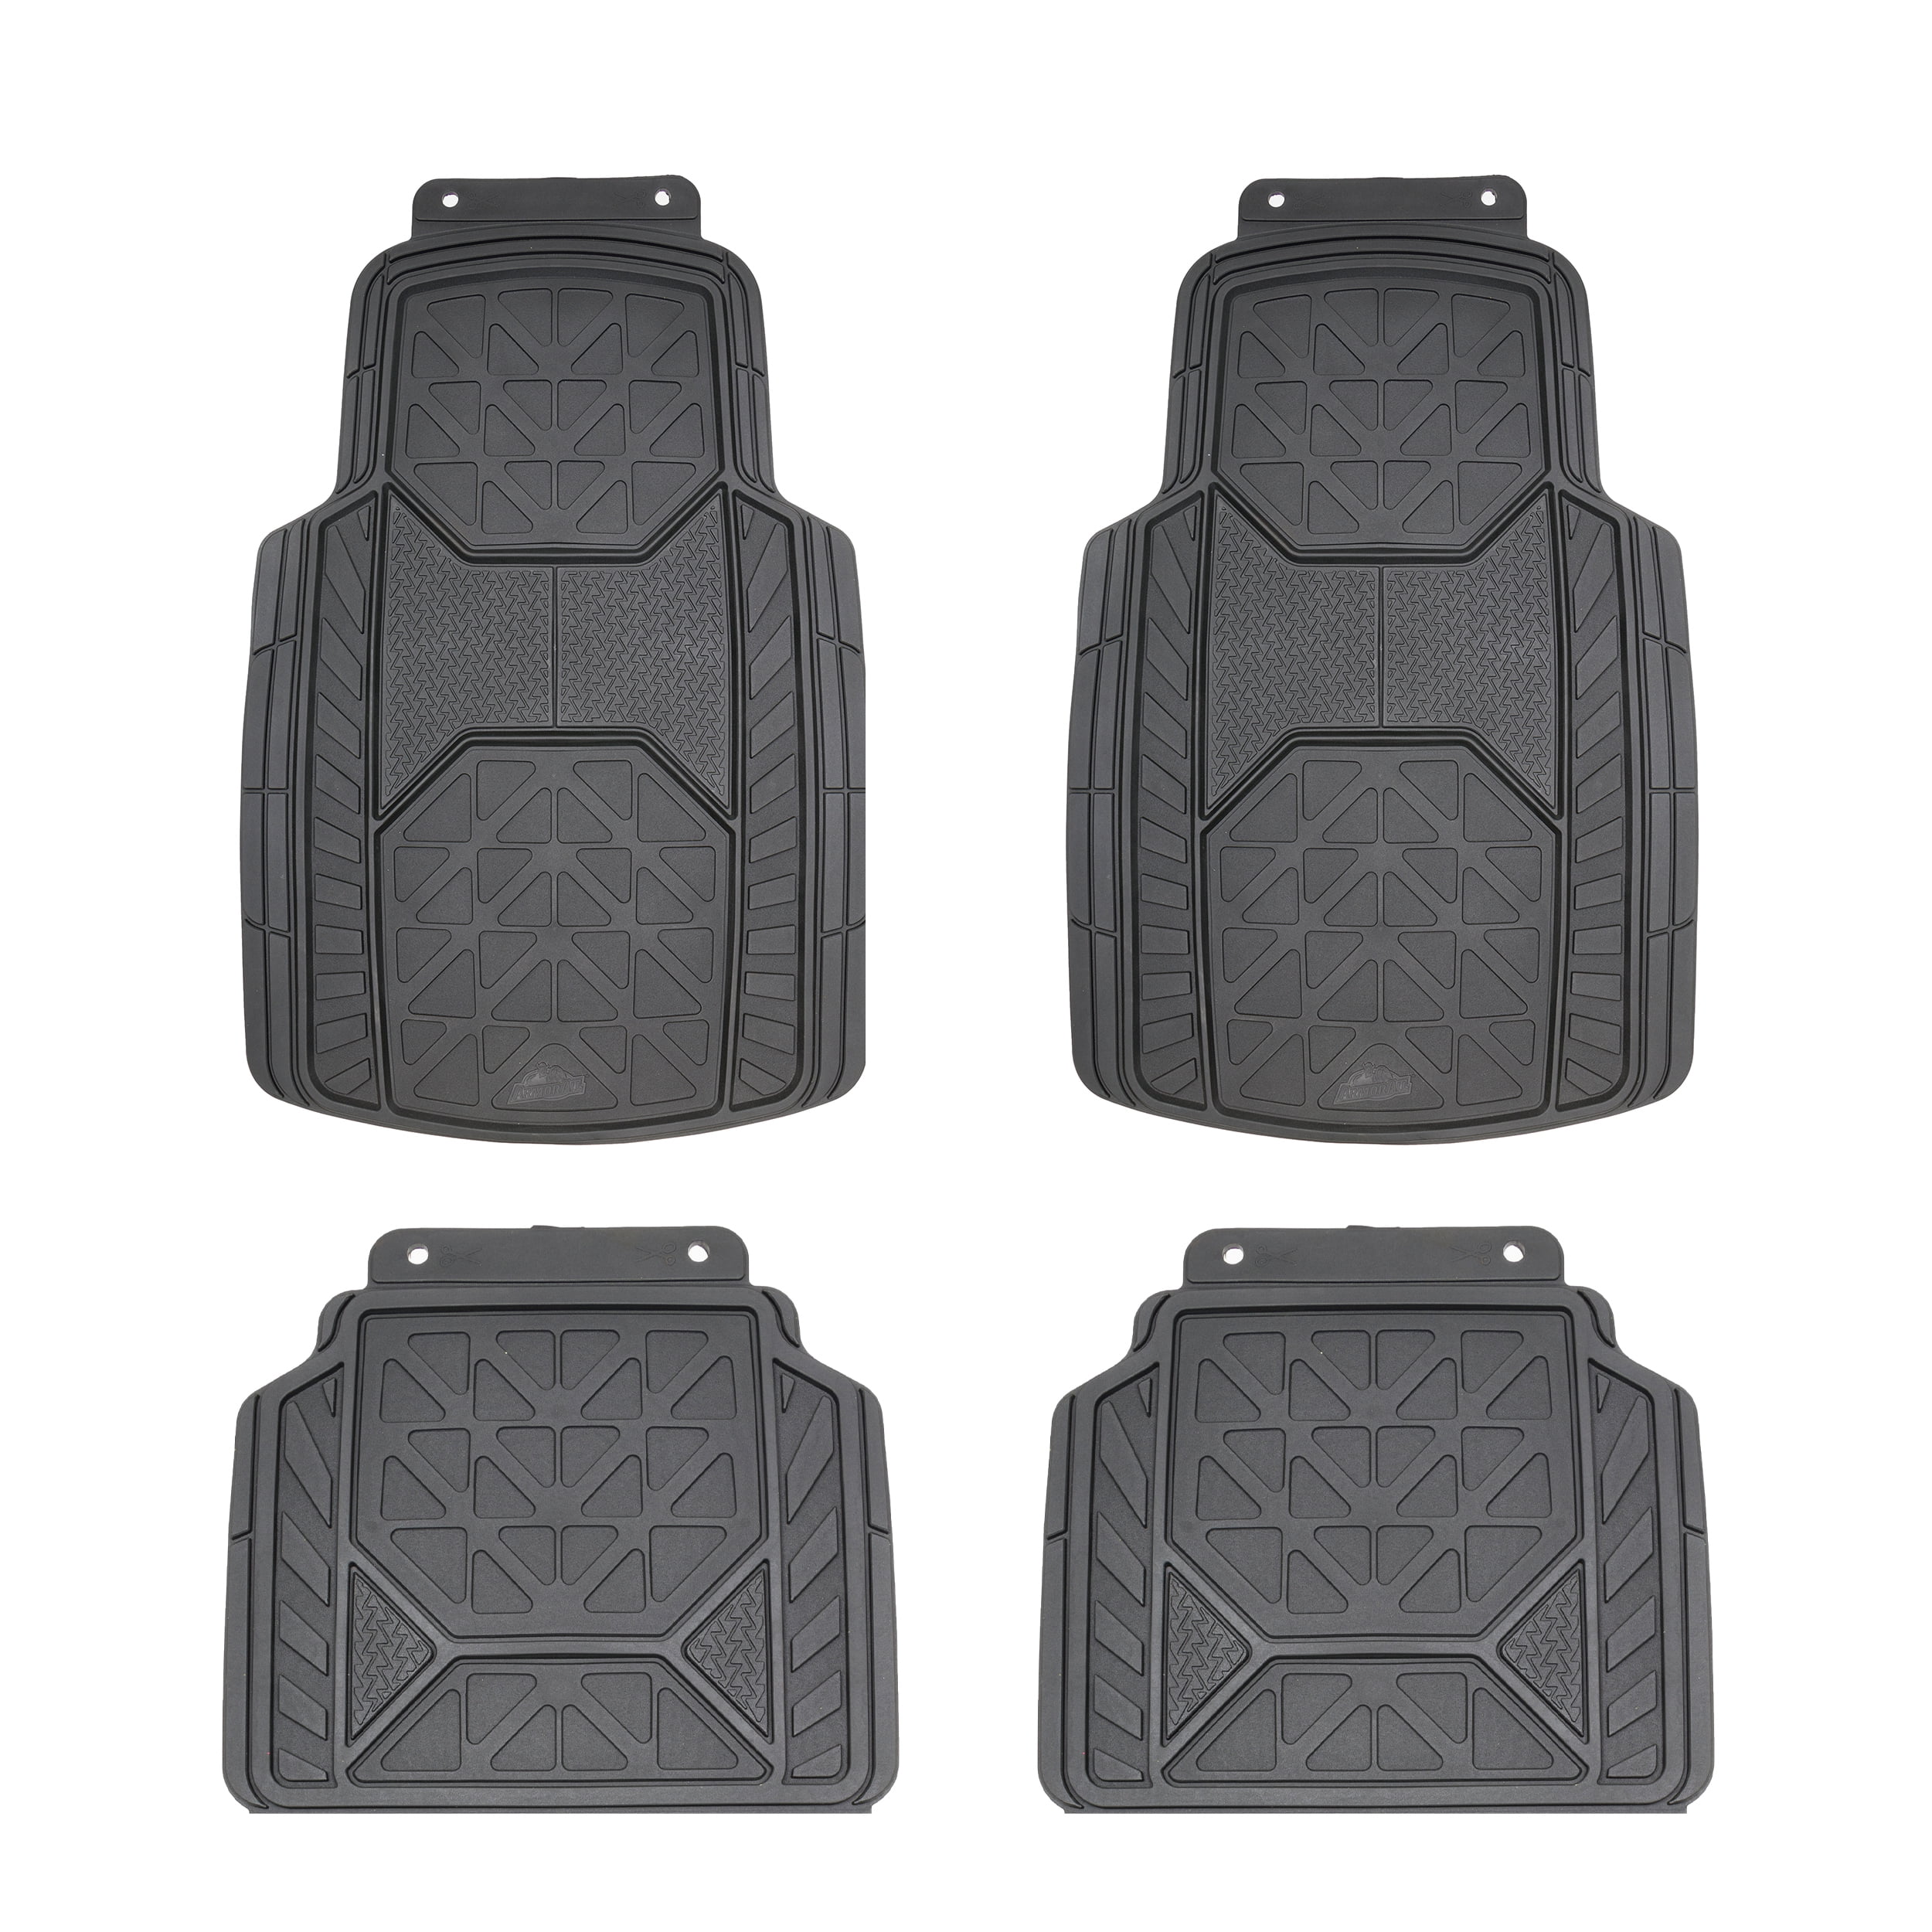 Armor All 4-Piece Rubber Trim-to-Fit Floor Mats Black, 79960DCWDI 